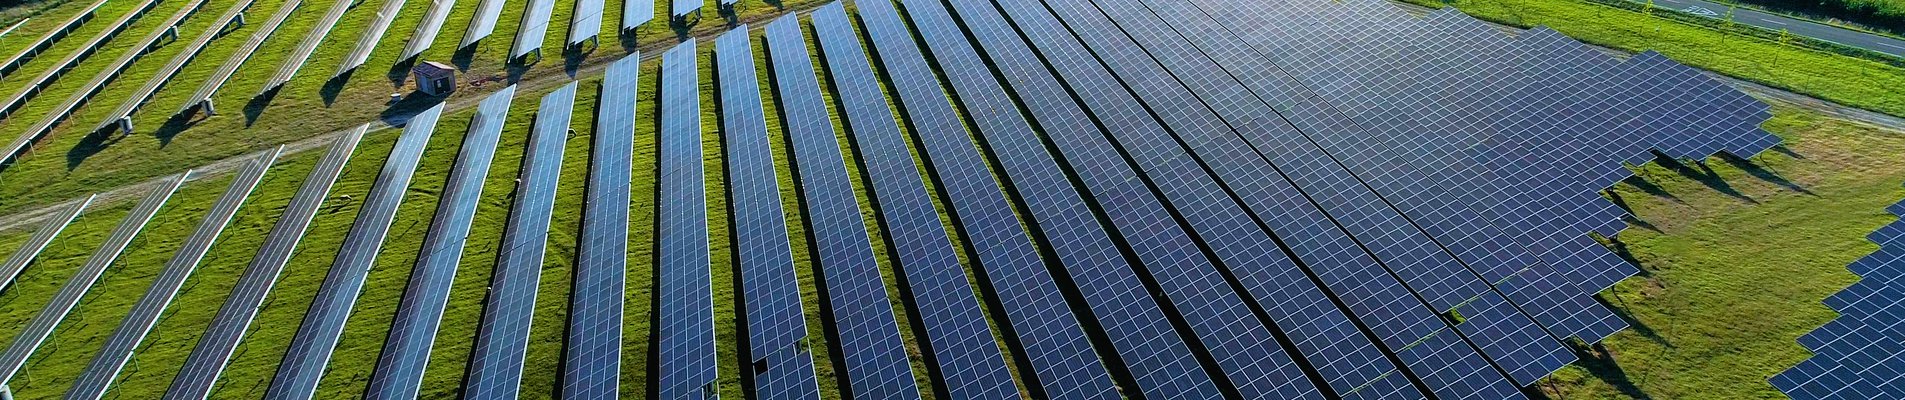 The "Three Seas" investment fund makes its first investment with assets in Bulgaria - a solar energy project